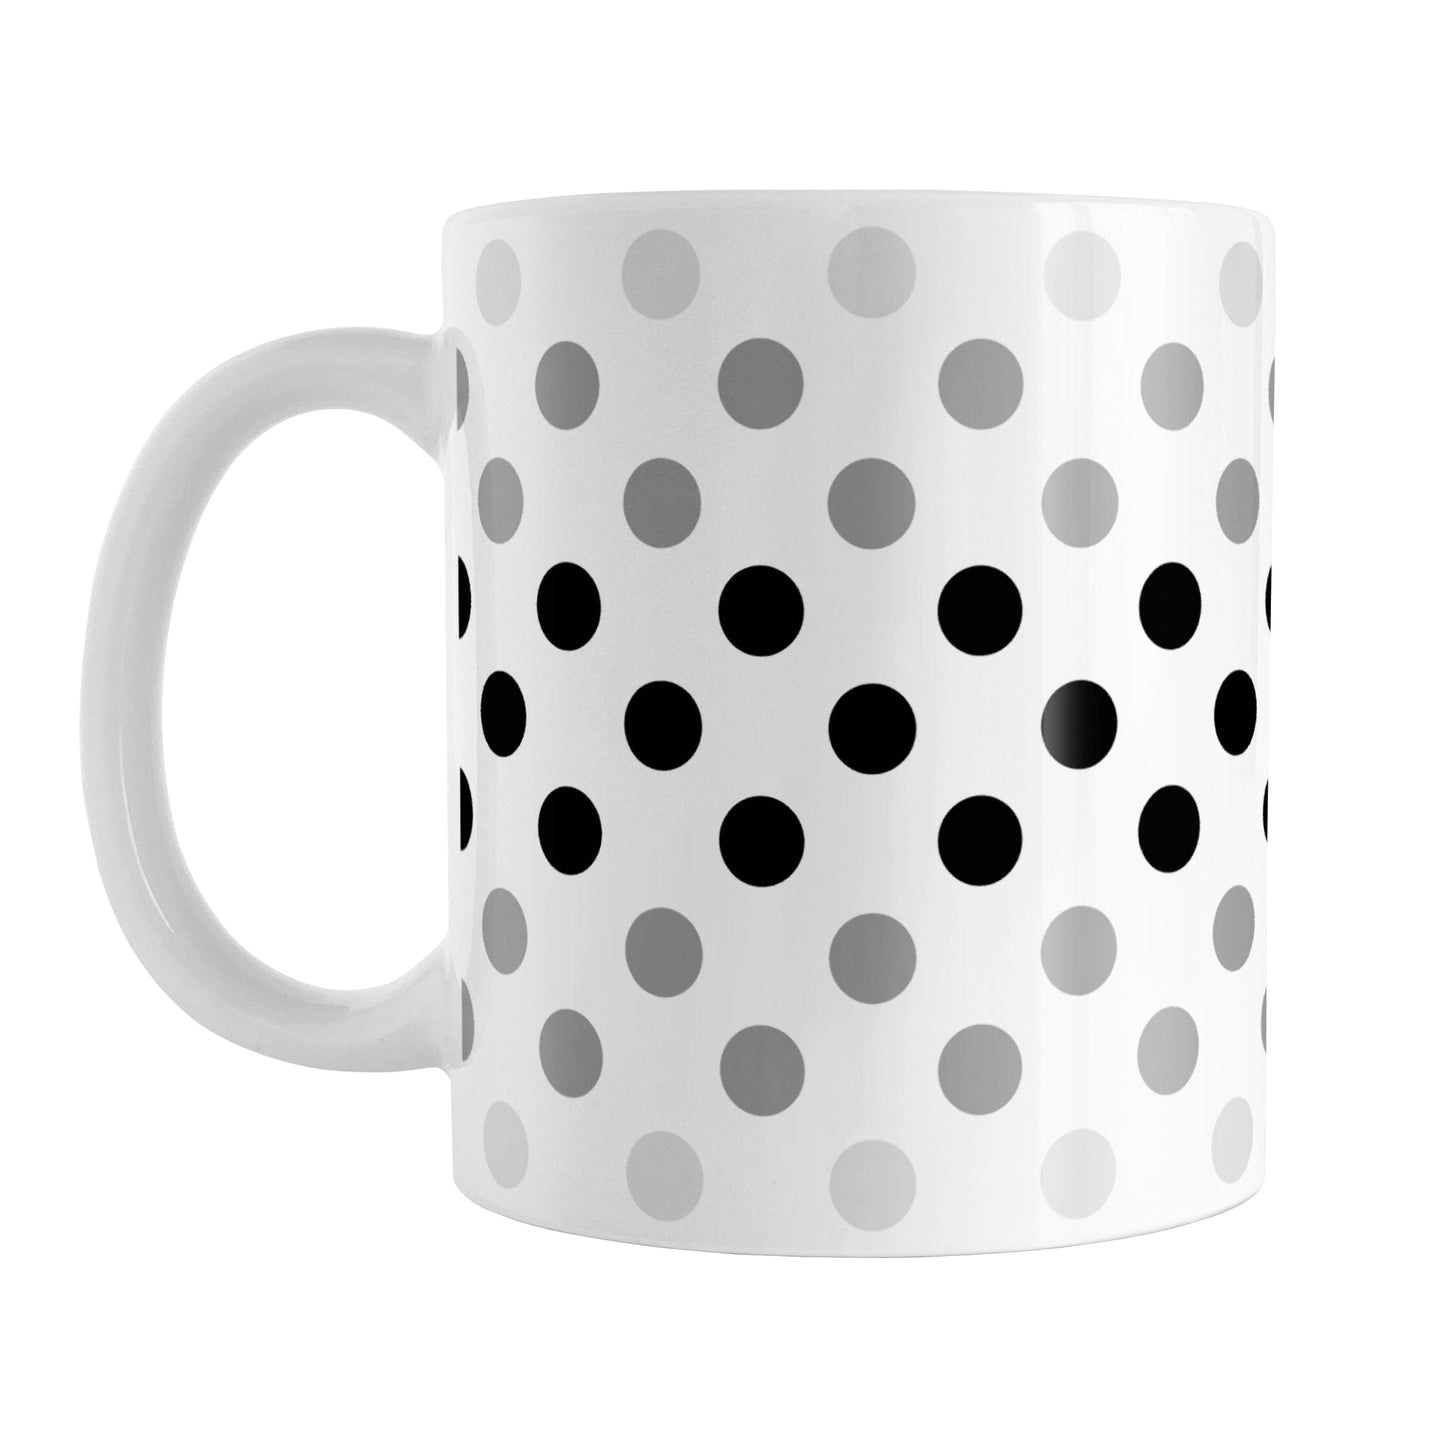 Polka Dots in Black Gray Mug (11oz) at Amy's Coffee Mugs. A ceramic coffee mug designed with polka dots in different shades of black and gray, with the black across the middle and the lighter shades of gray along the top and bottom, in a pattern that wraps around the mug to the handle. 